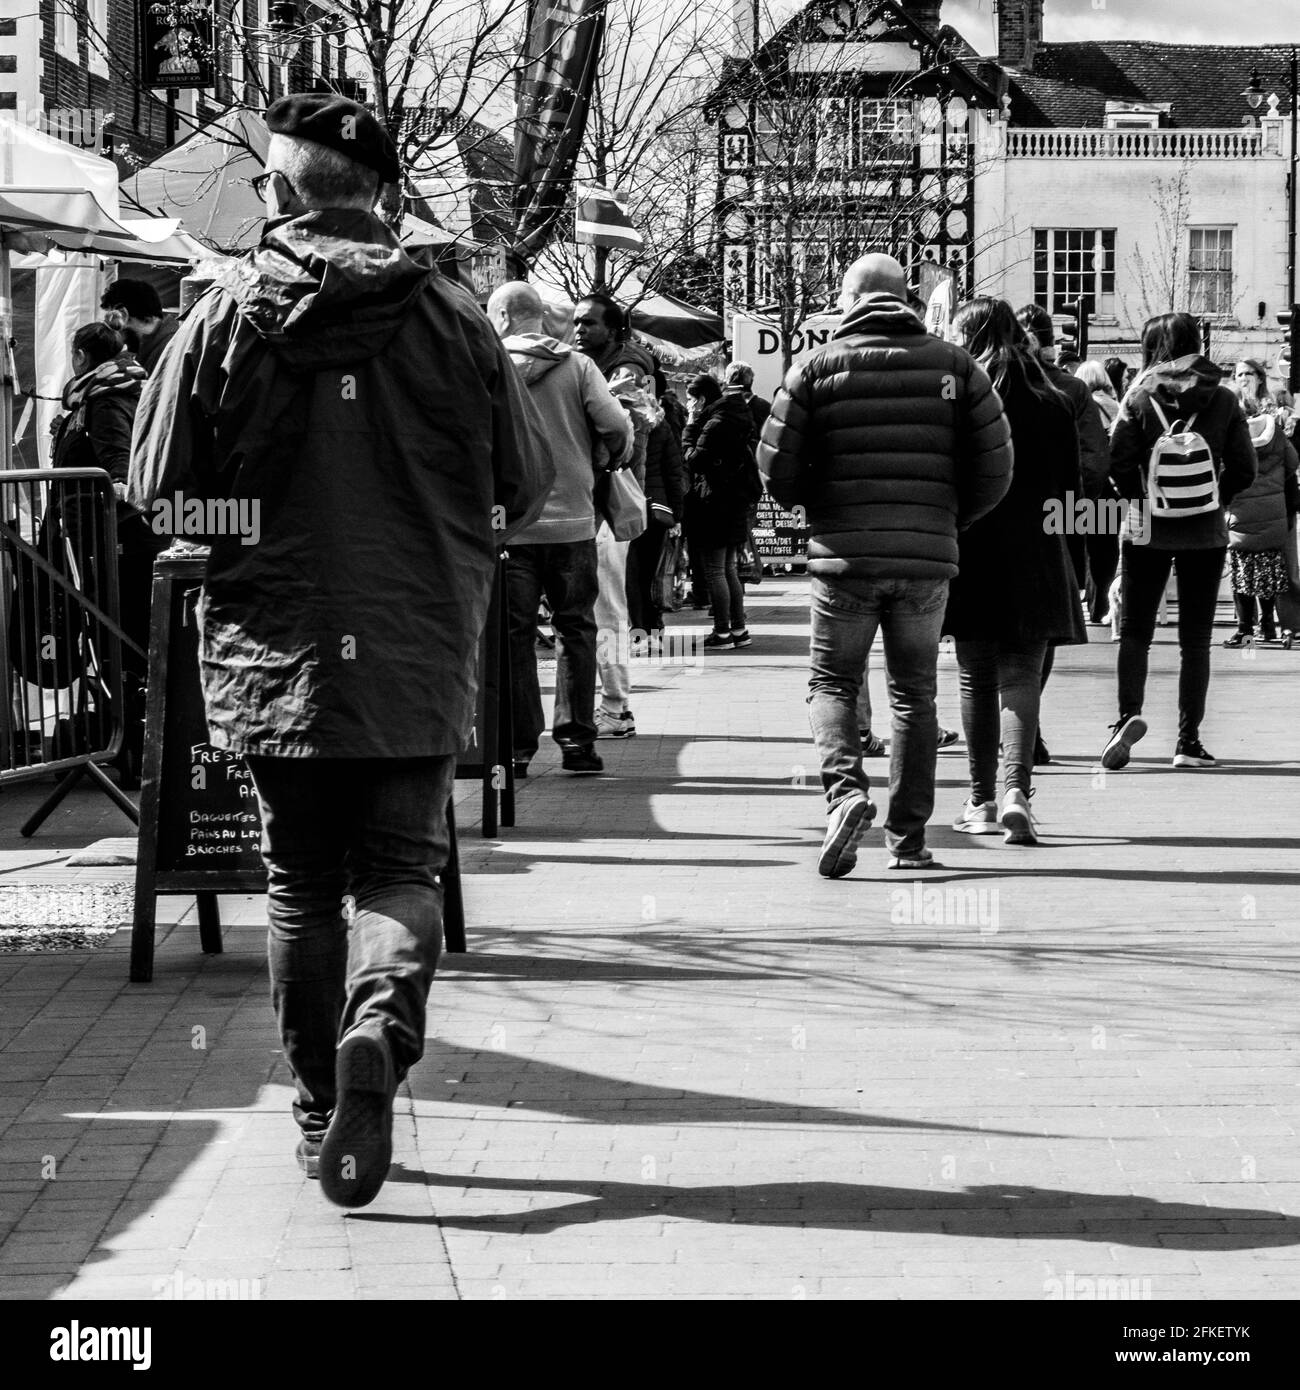 Epsom Surrey London UK, April 2021, Group Or Crowd Of People Or Shoppers In An Open Outdoor Market Stock Photo